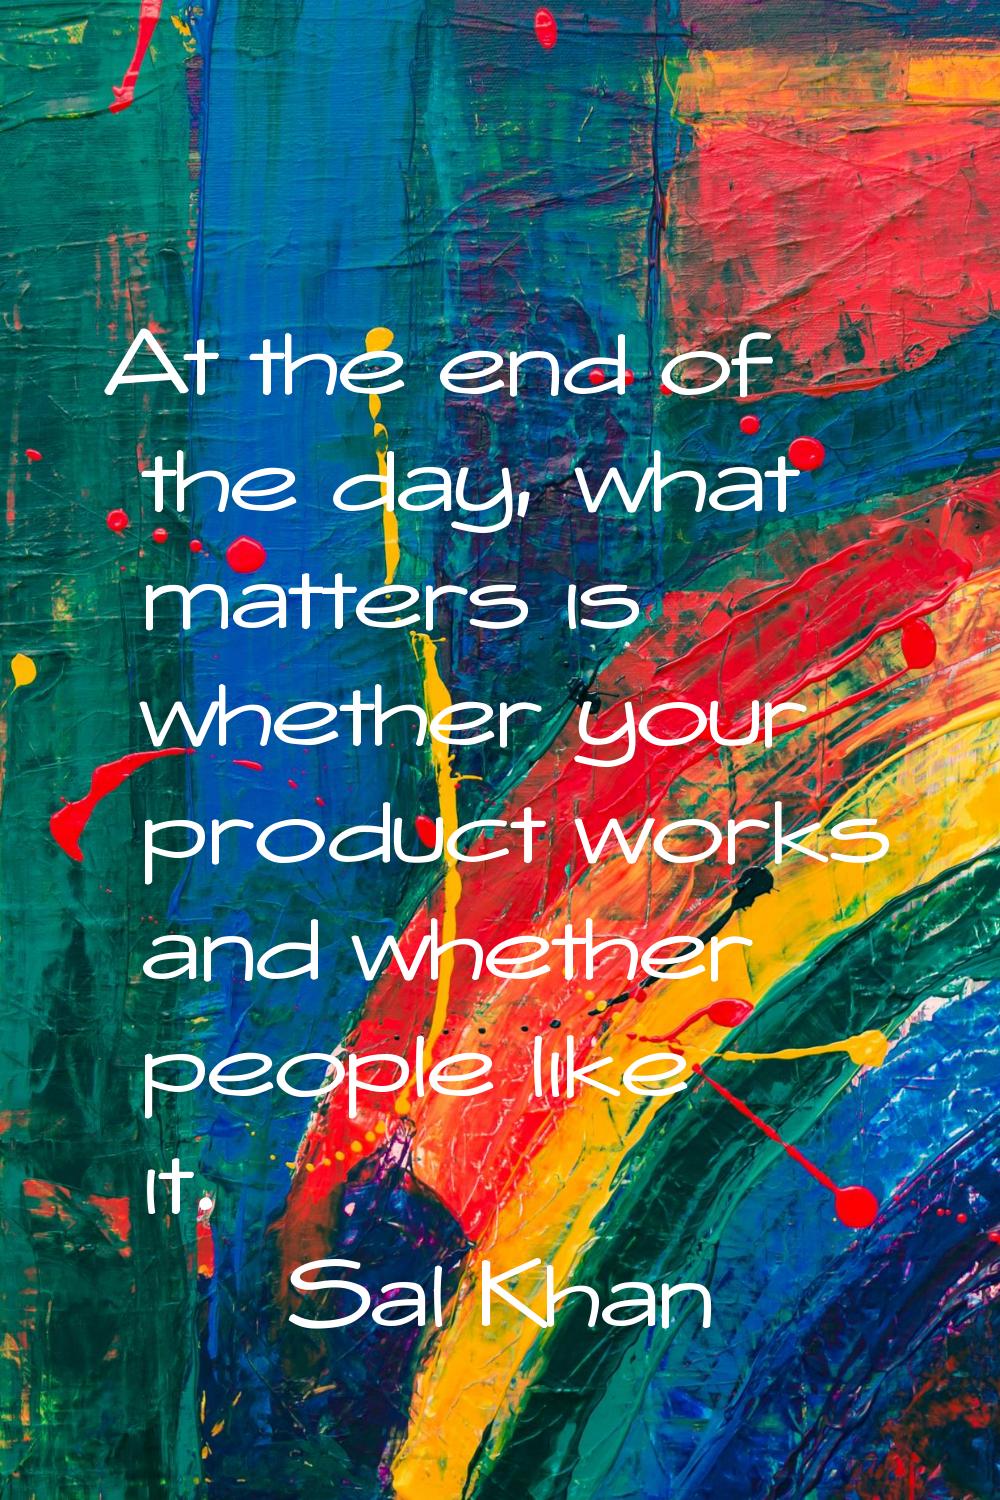 At the end of the day, what matters is whether your product works and whether people like it.